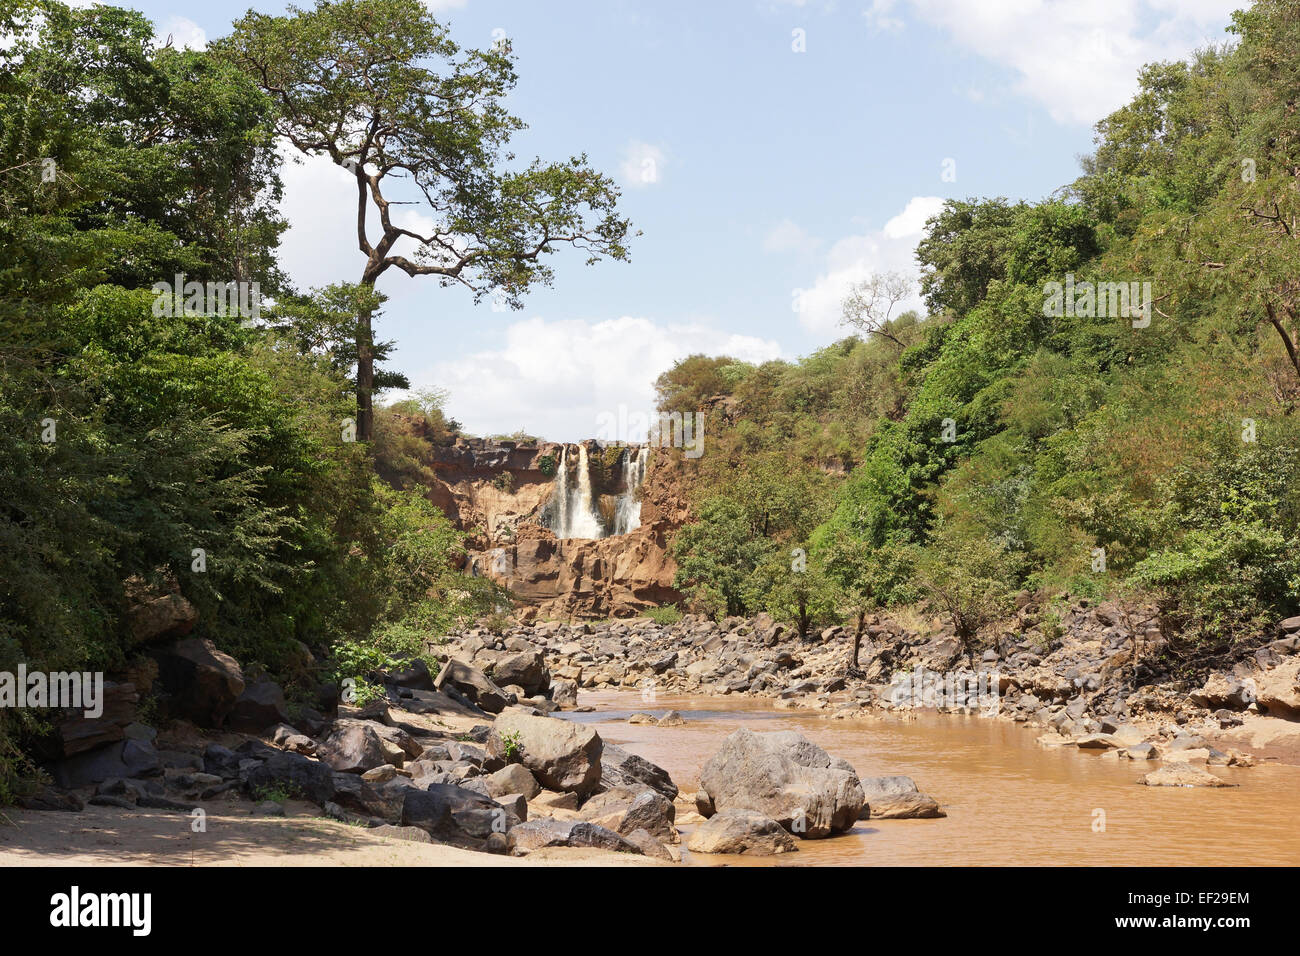 Landscape in the Great Rift Valley, Ethiopia, Africa Stock Photo